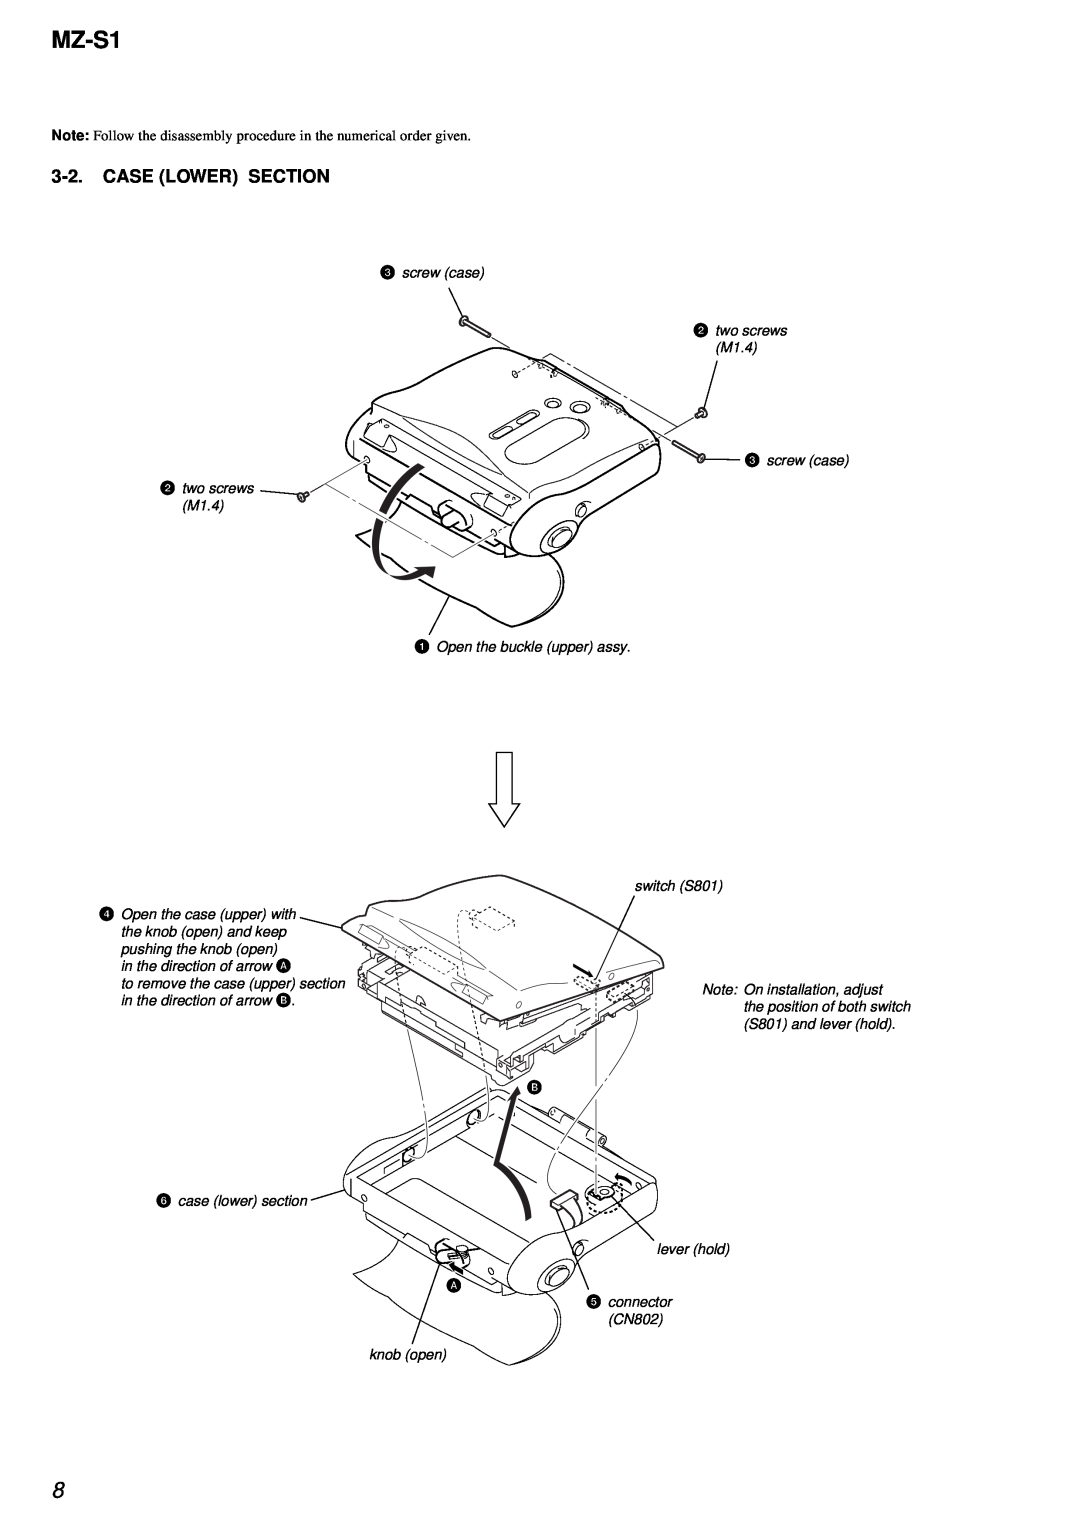 Sony MZ-S1 service manual Case Lower Section 